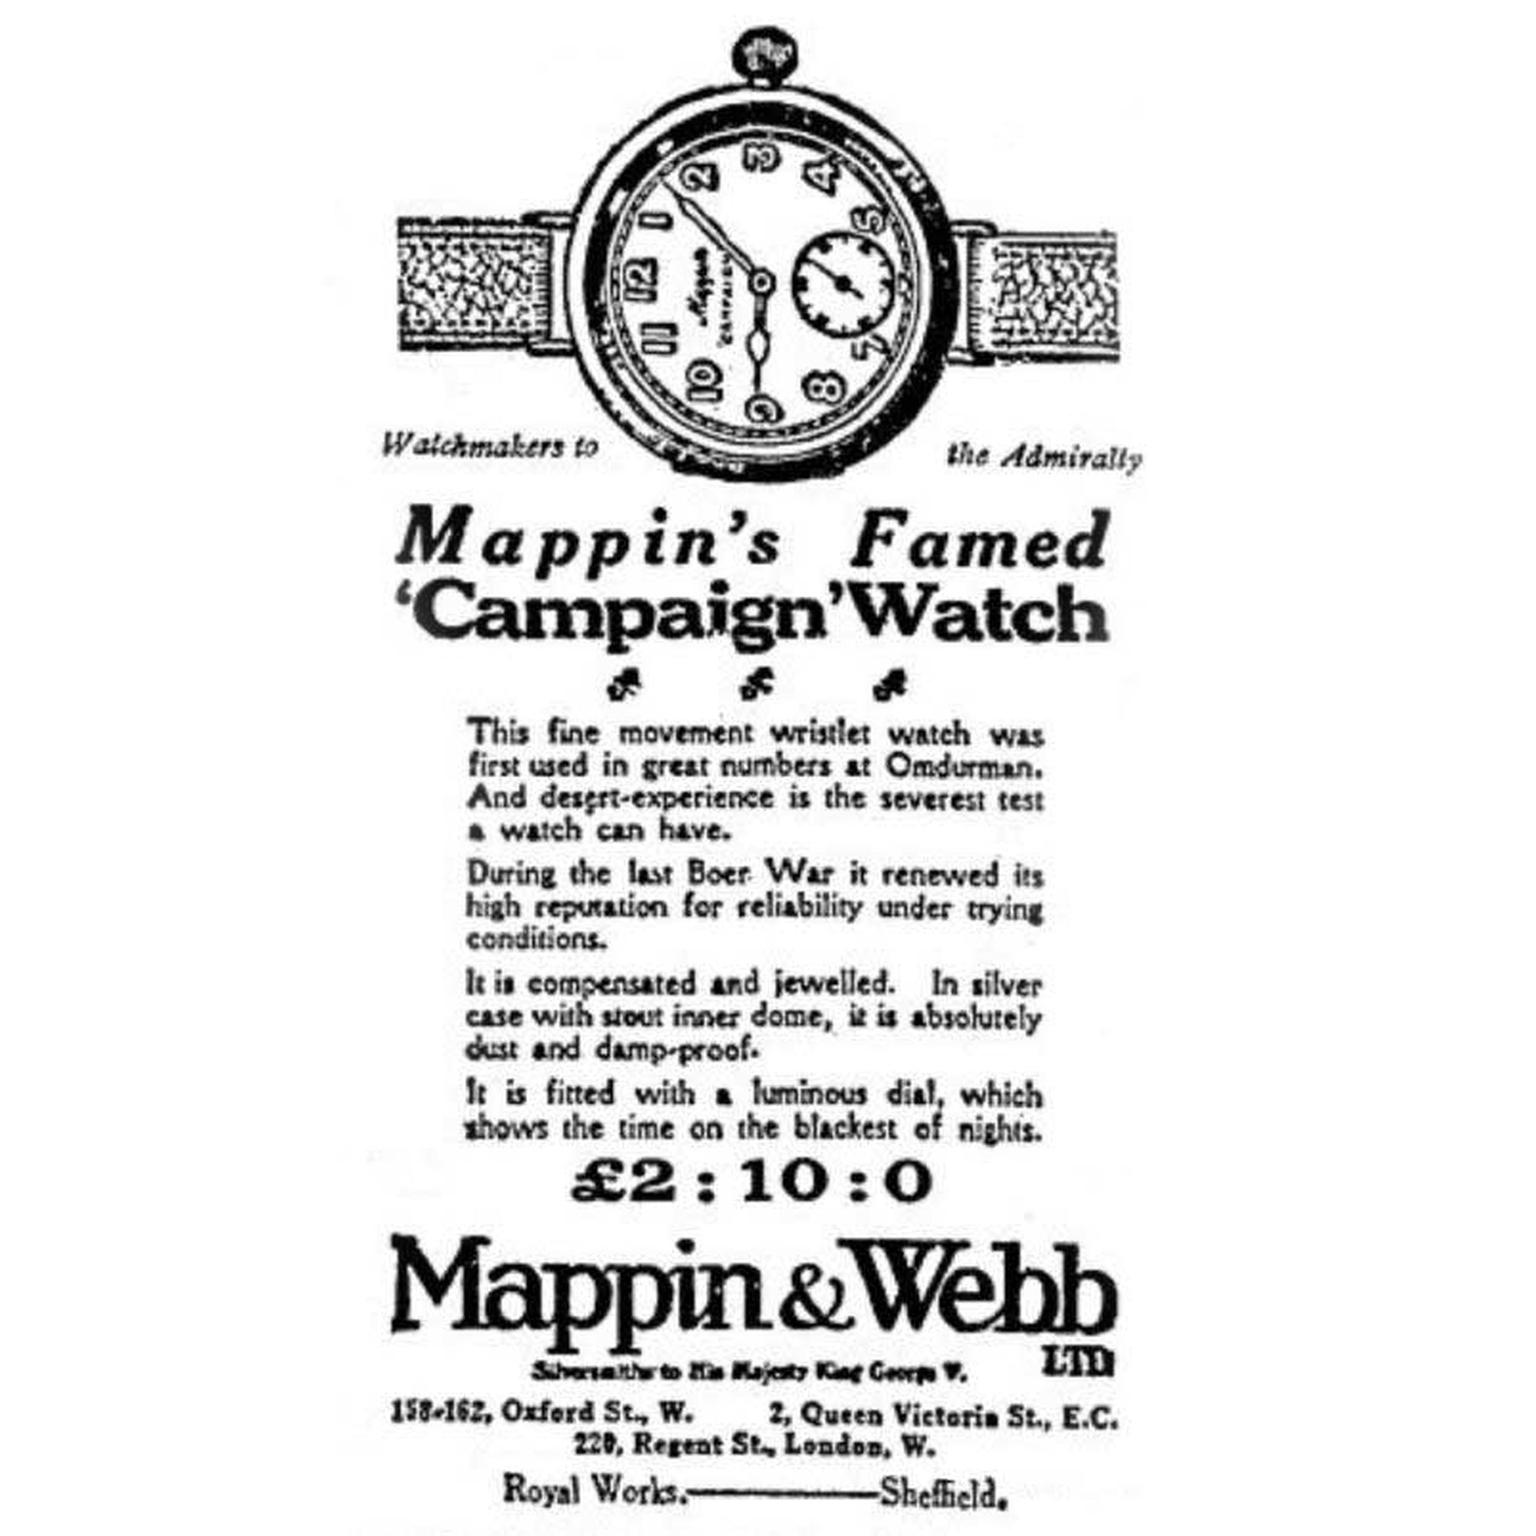 Mappin & Webb Campaign watch ad from WW1